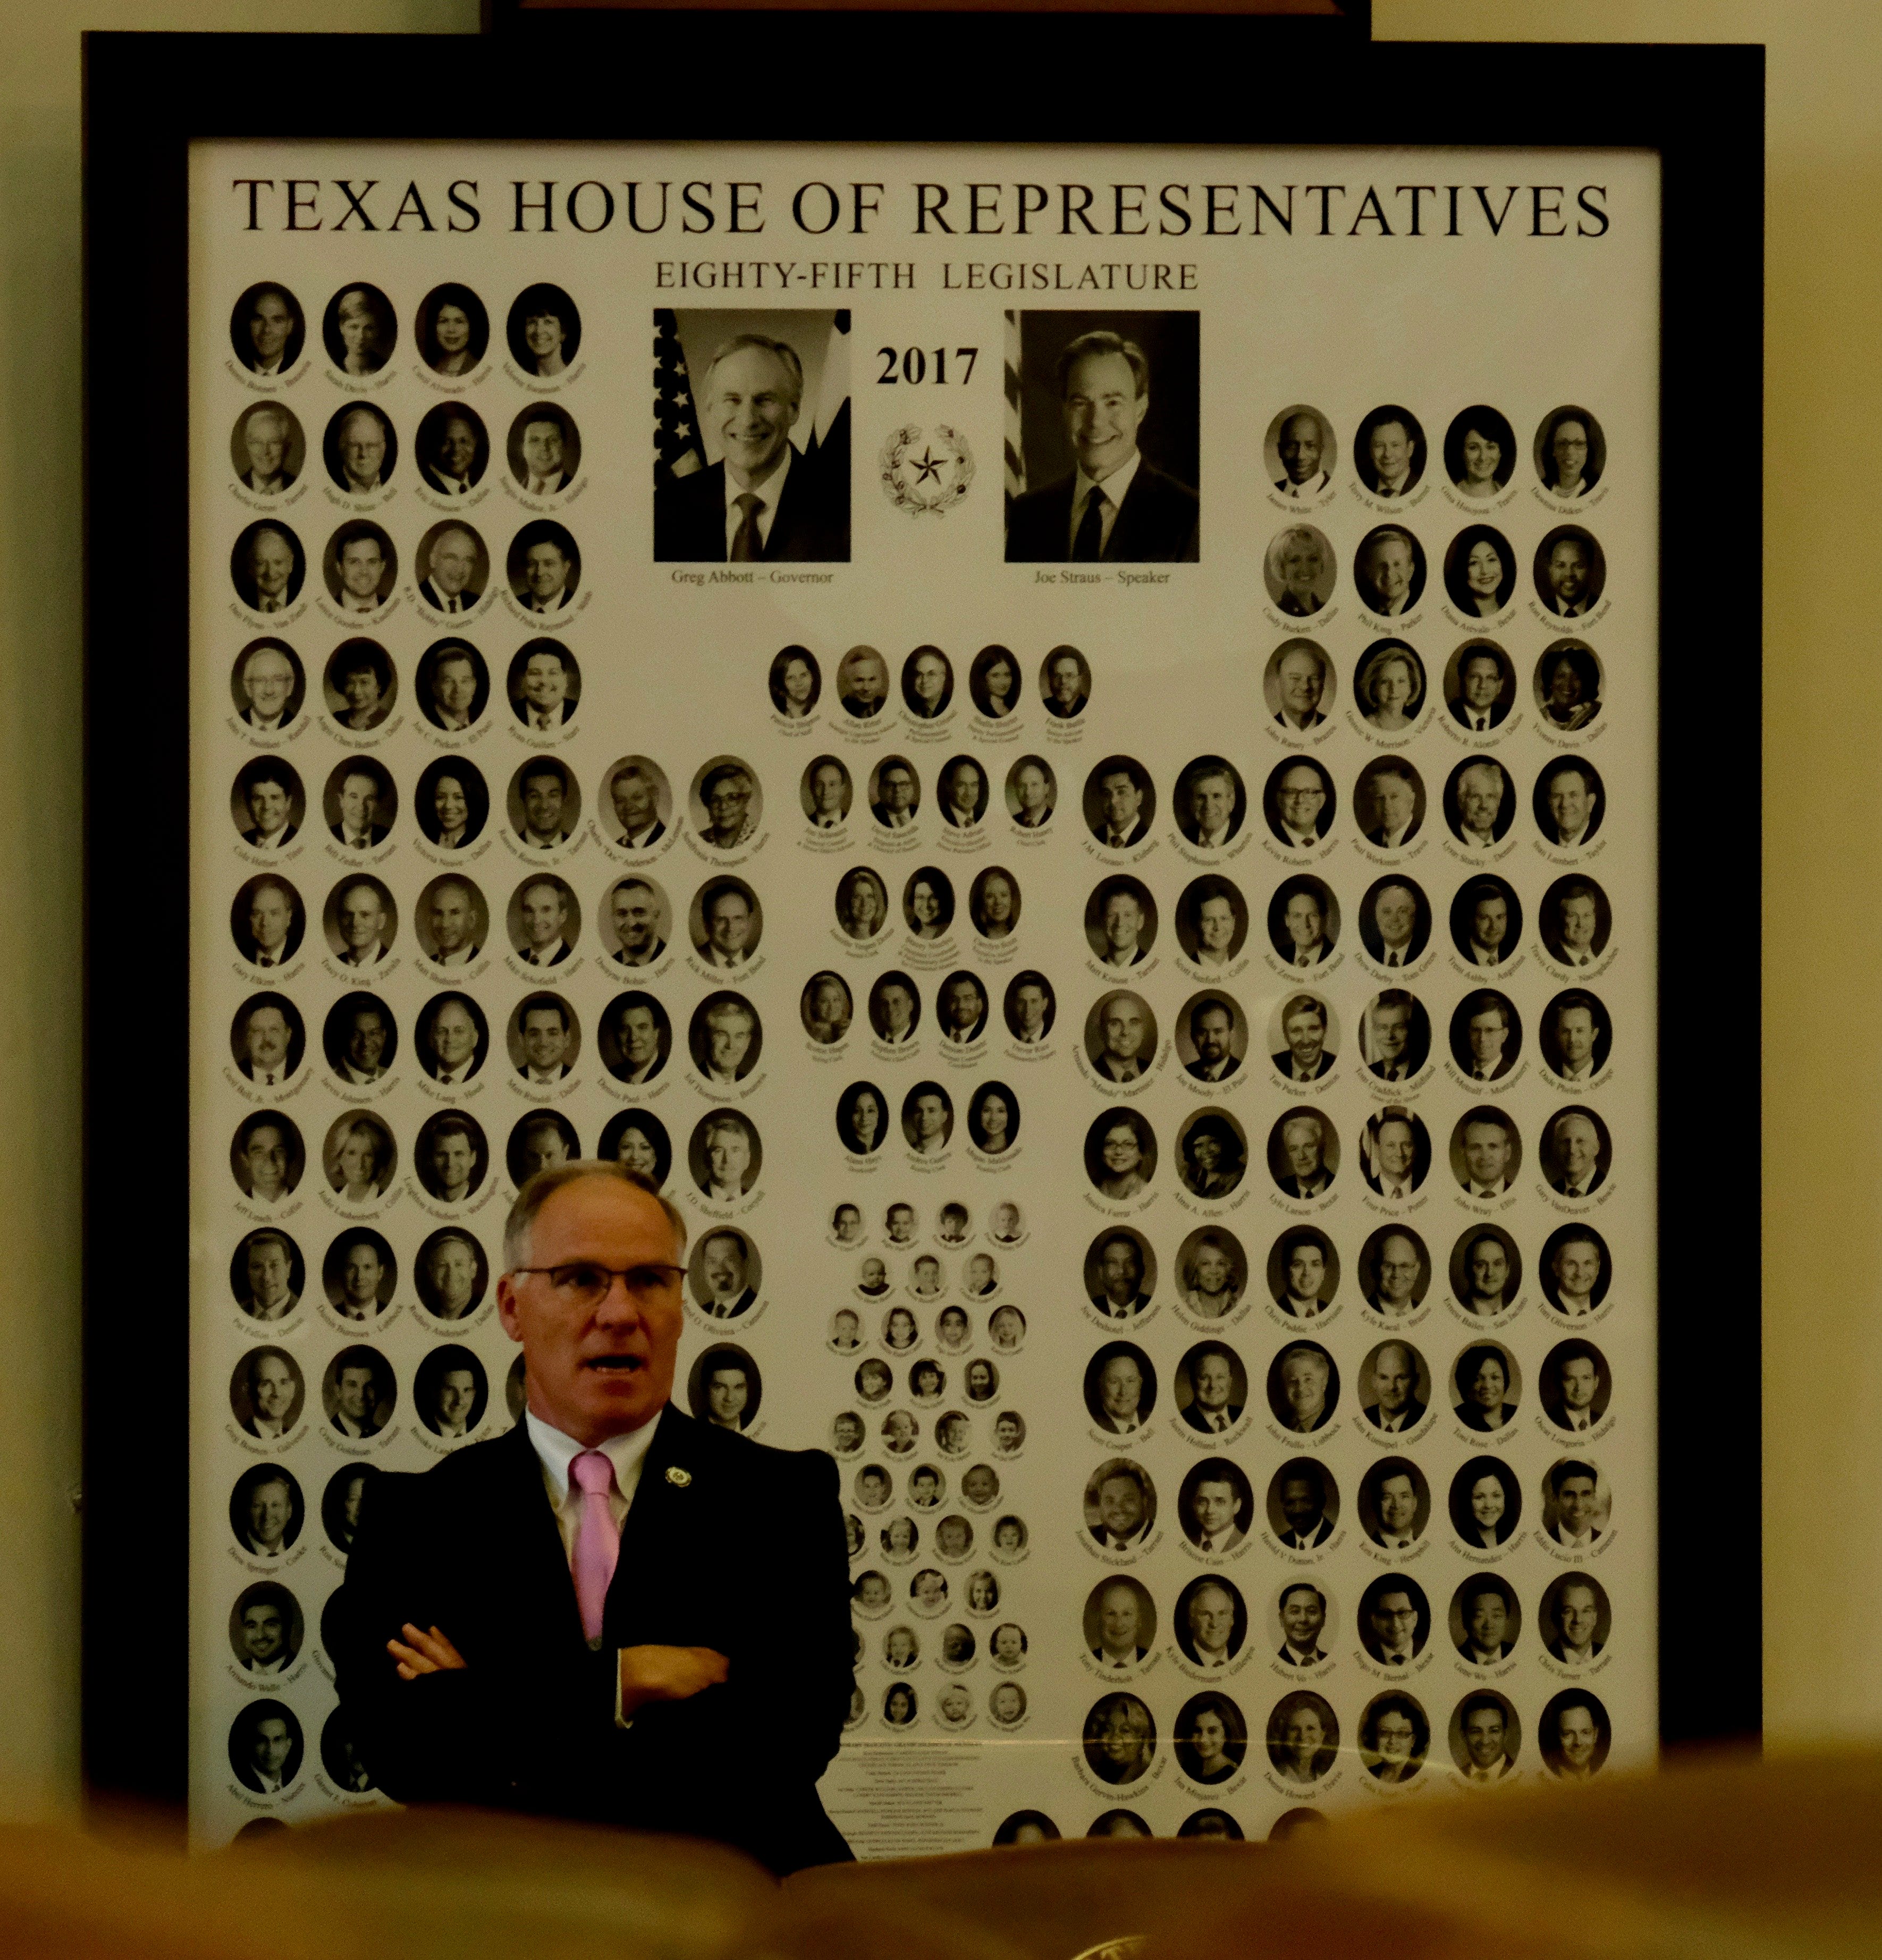 Rep. Kyle Biedermann, R-Fredericksburg, shown here in Texas House in 2019, failed with a 2019 bill to have his hometown designation switched from Polka Capital of Texas to Wine Capital of Texas.